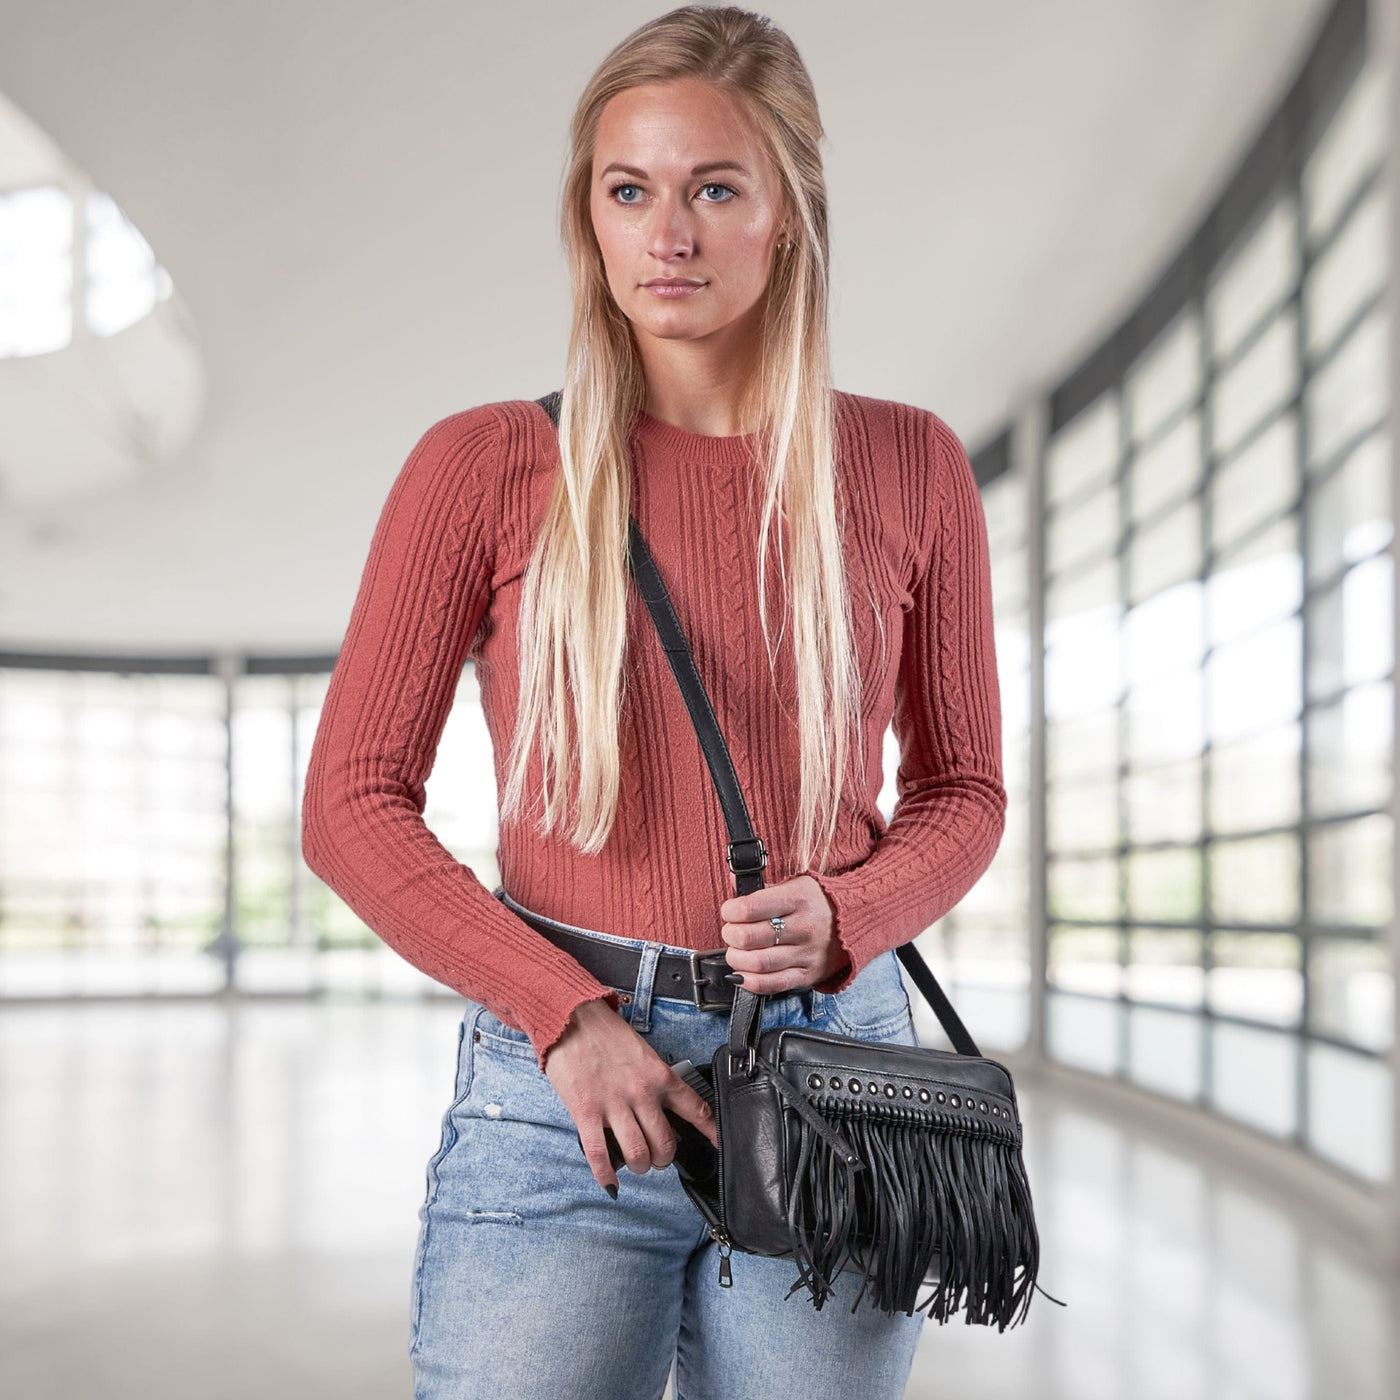 Concealed Carry Maggie Fringe Crossbody for Women -  Soft Leather conceal and carry bag -  Tactical womans purse for pistol -  Concealed Carry Purse -  most popular crossbody bag -  black modern style crossbody bag -  crossbody handgun bag -  crossbody bags for everyday use -  Lady Conceal -  Unique Hide Purse -  Locking YKK Purse -  Fanny Pack for Gun and Pistol -  Easy CCW -  Fast Draw Bag -  Secure Gun Bag